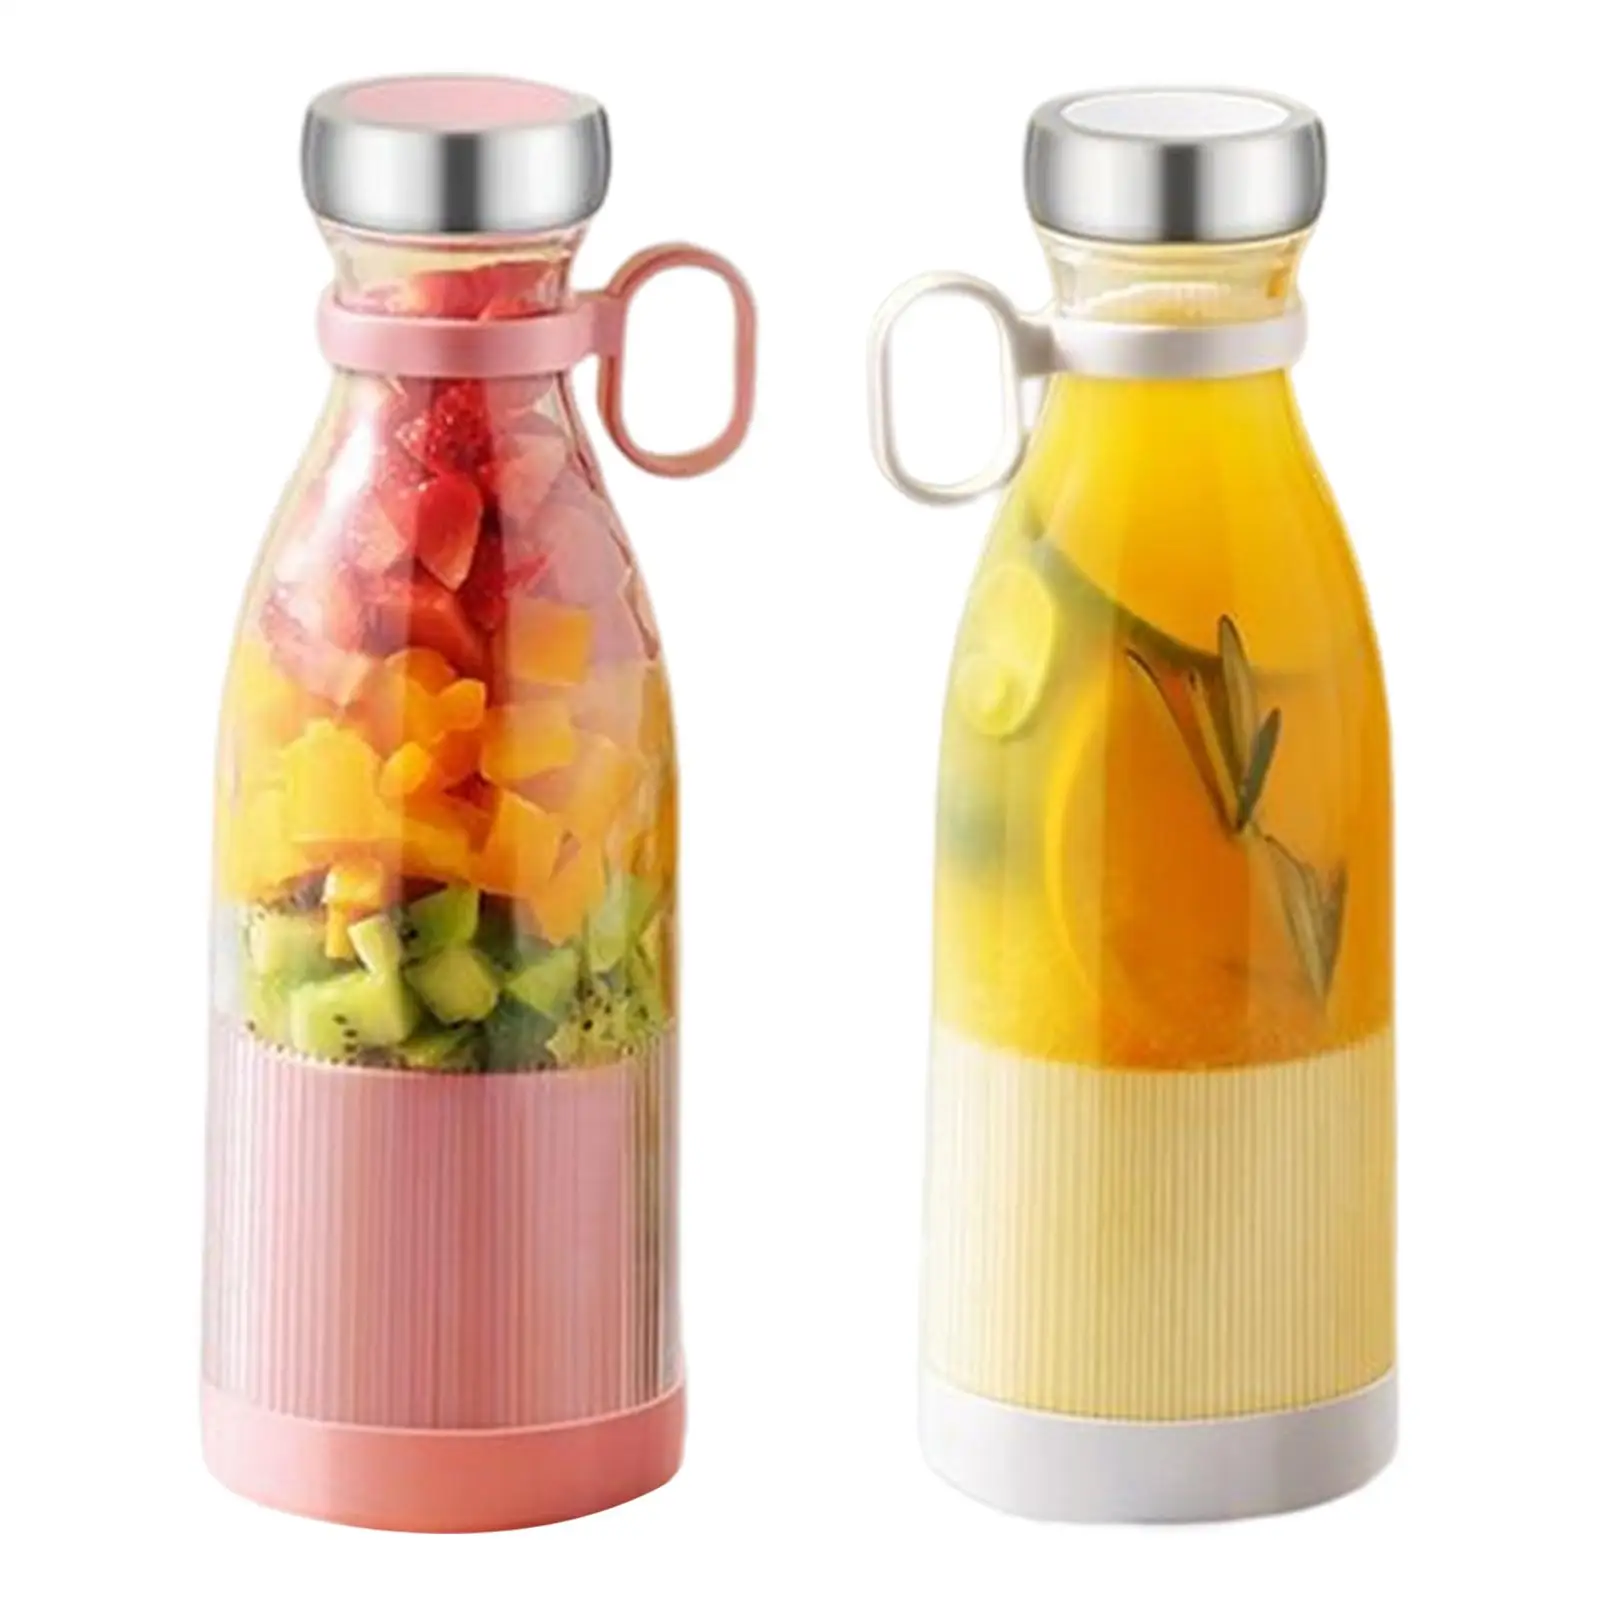 Multifunction Juicer Machines easy Clean Detachable for Office Vegetable Fruit